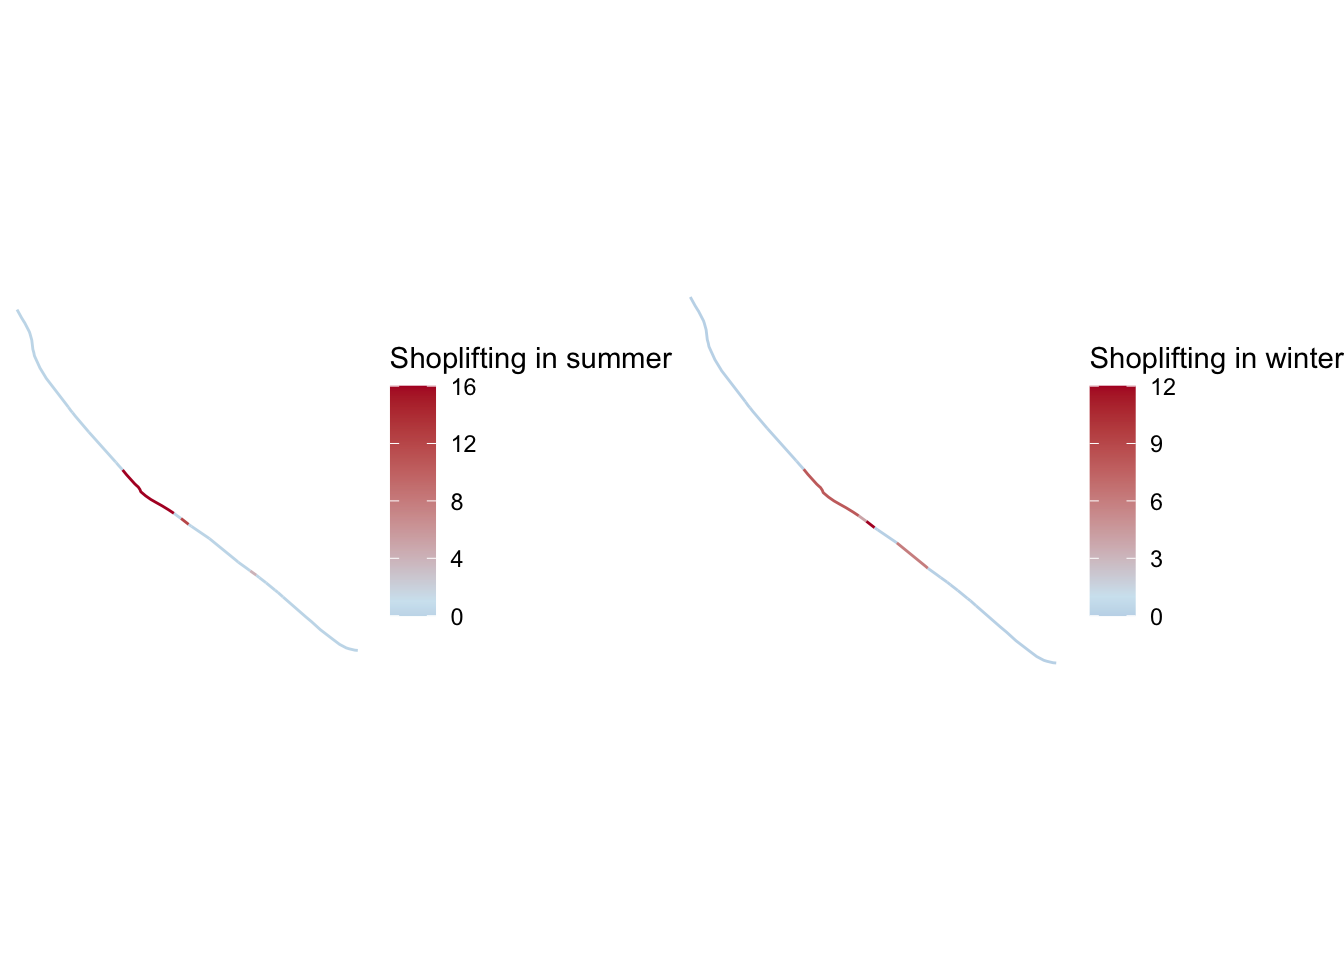 Two plots both show one line corresponding to the main street seen in previous line maps, with its segments shaded in blue and red. A legend accompanies each one, the first labeled 'Shoplifting in summer', the second 'Shoplifting in winter'. The legends match a gradient of blue to red from the values zero to sixteen in the first plot, and zero to twelve in the second. Both roads are mostly light blue, with the same central segments being a darker red. One additional segment, different in each plot, further to the bottom right is also a shade of red.